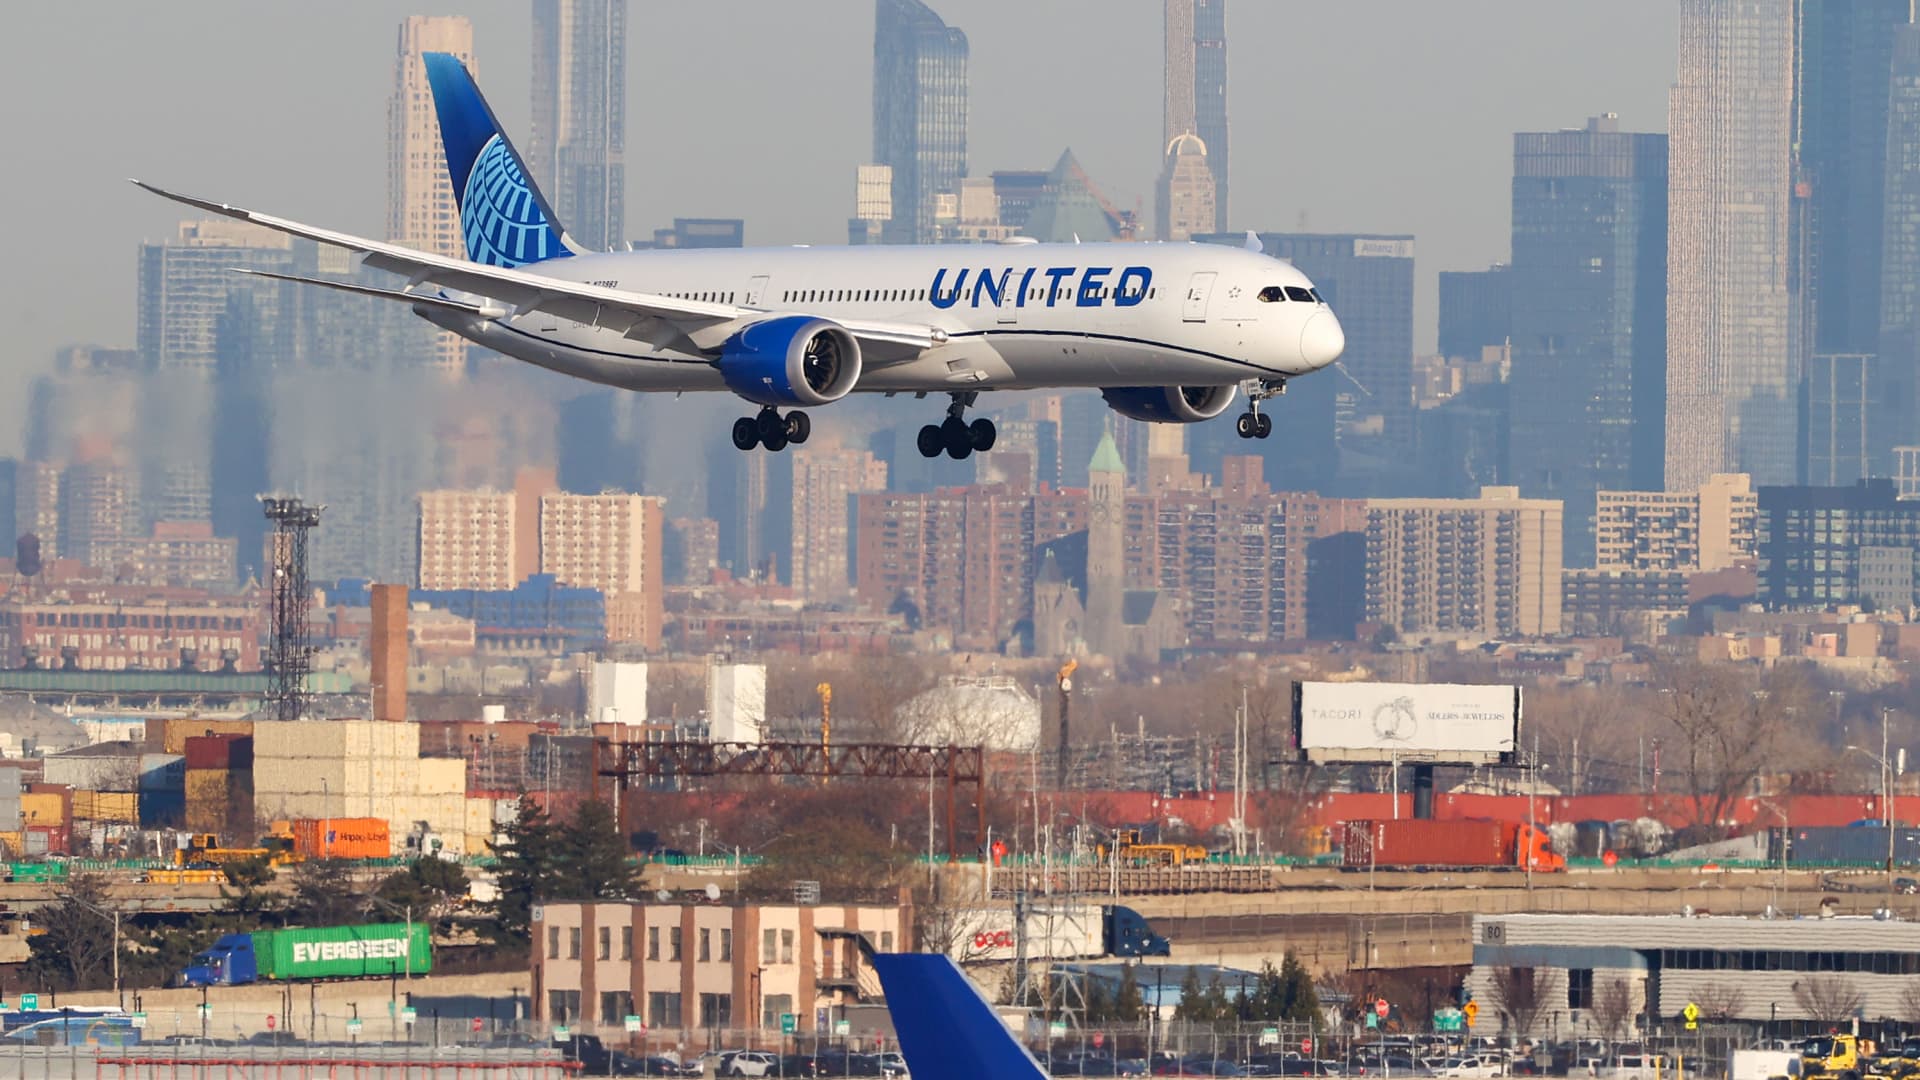 United Airlines will cut 12% of Newark flights in effort to tame delays